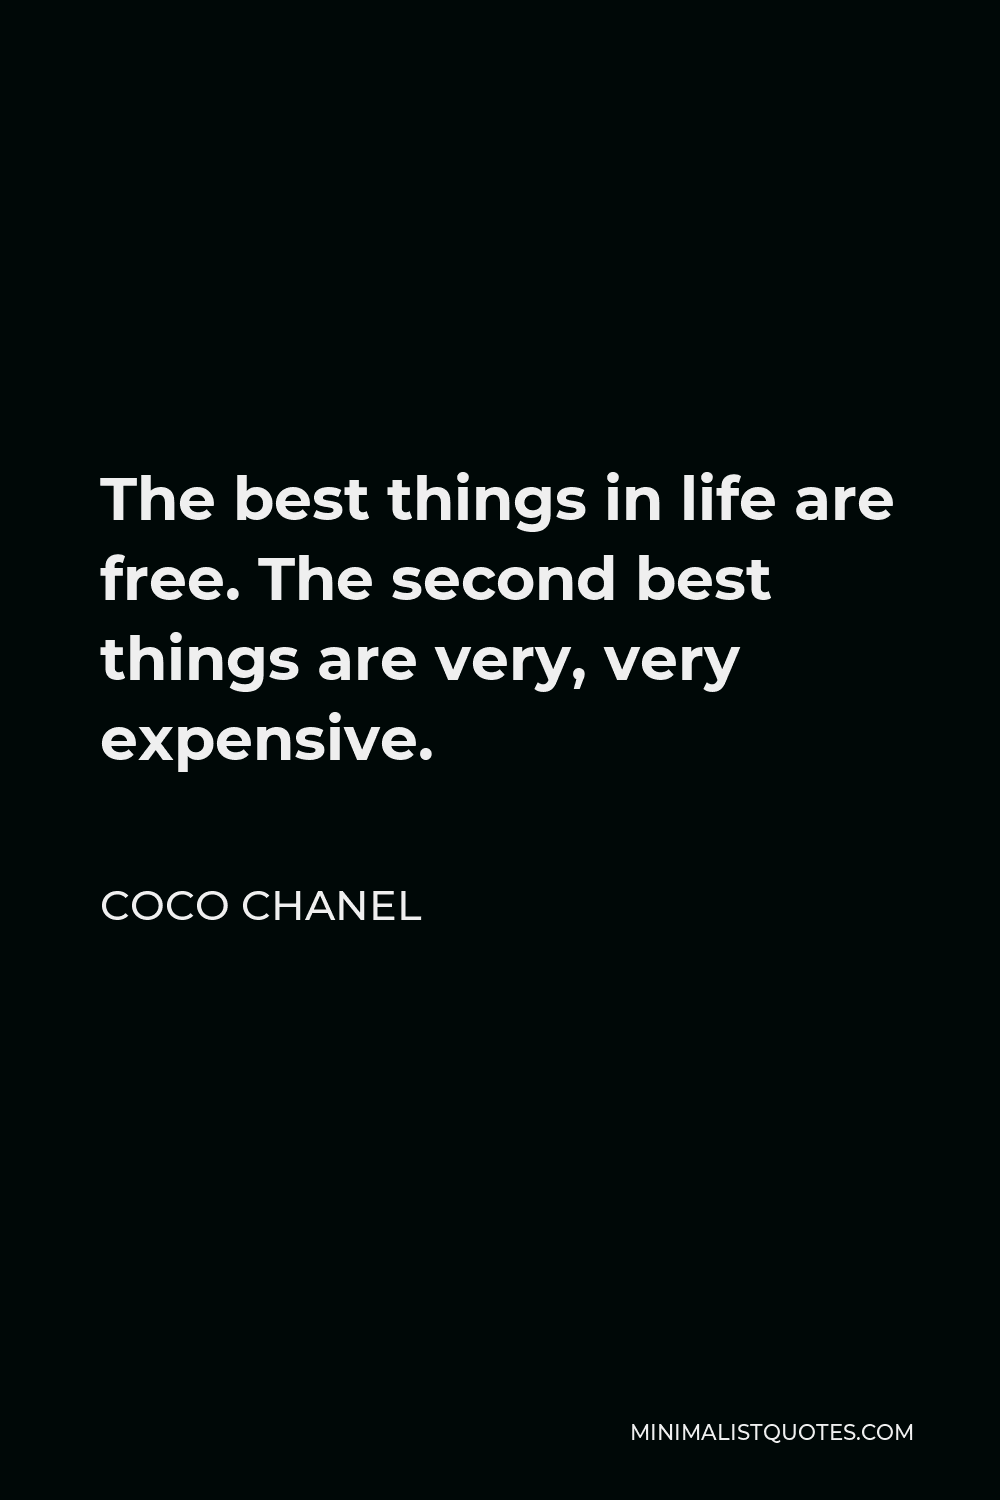 The best things in life are free. The second best are very